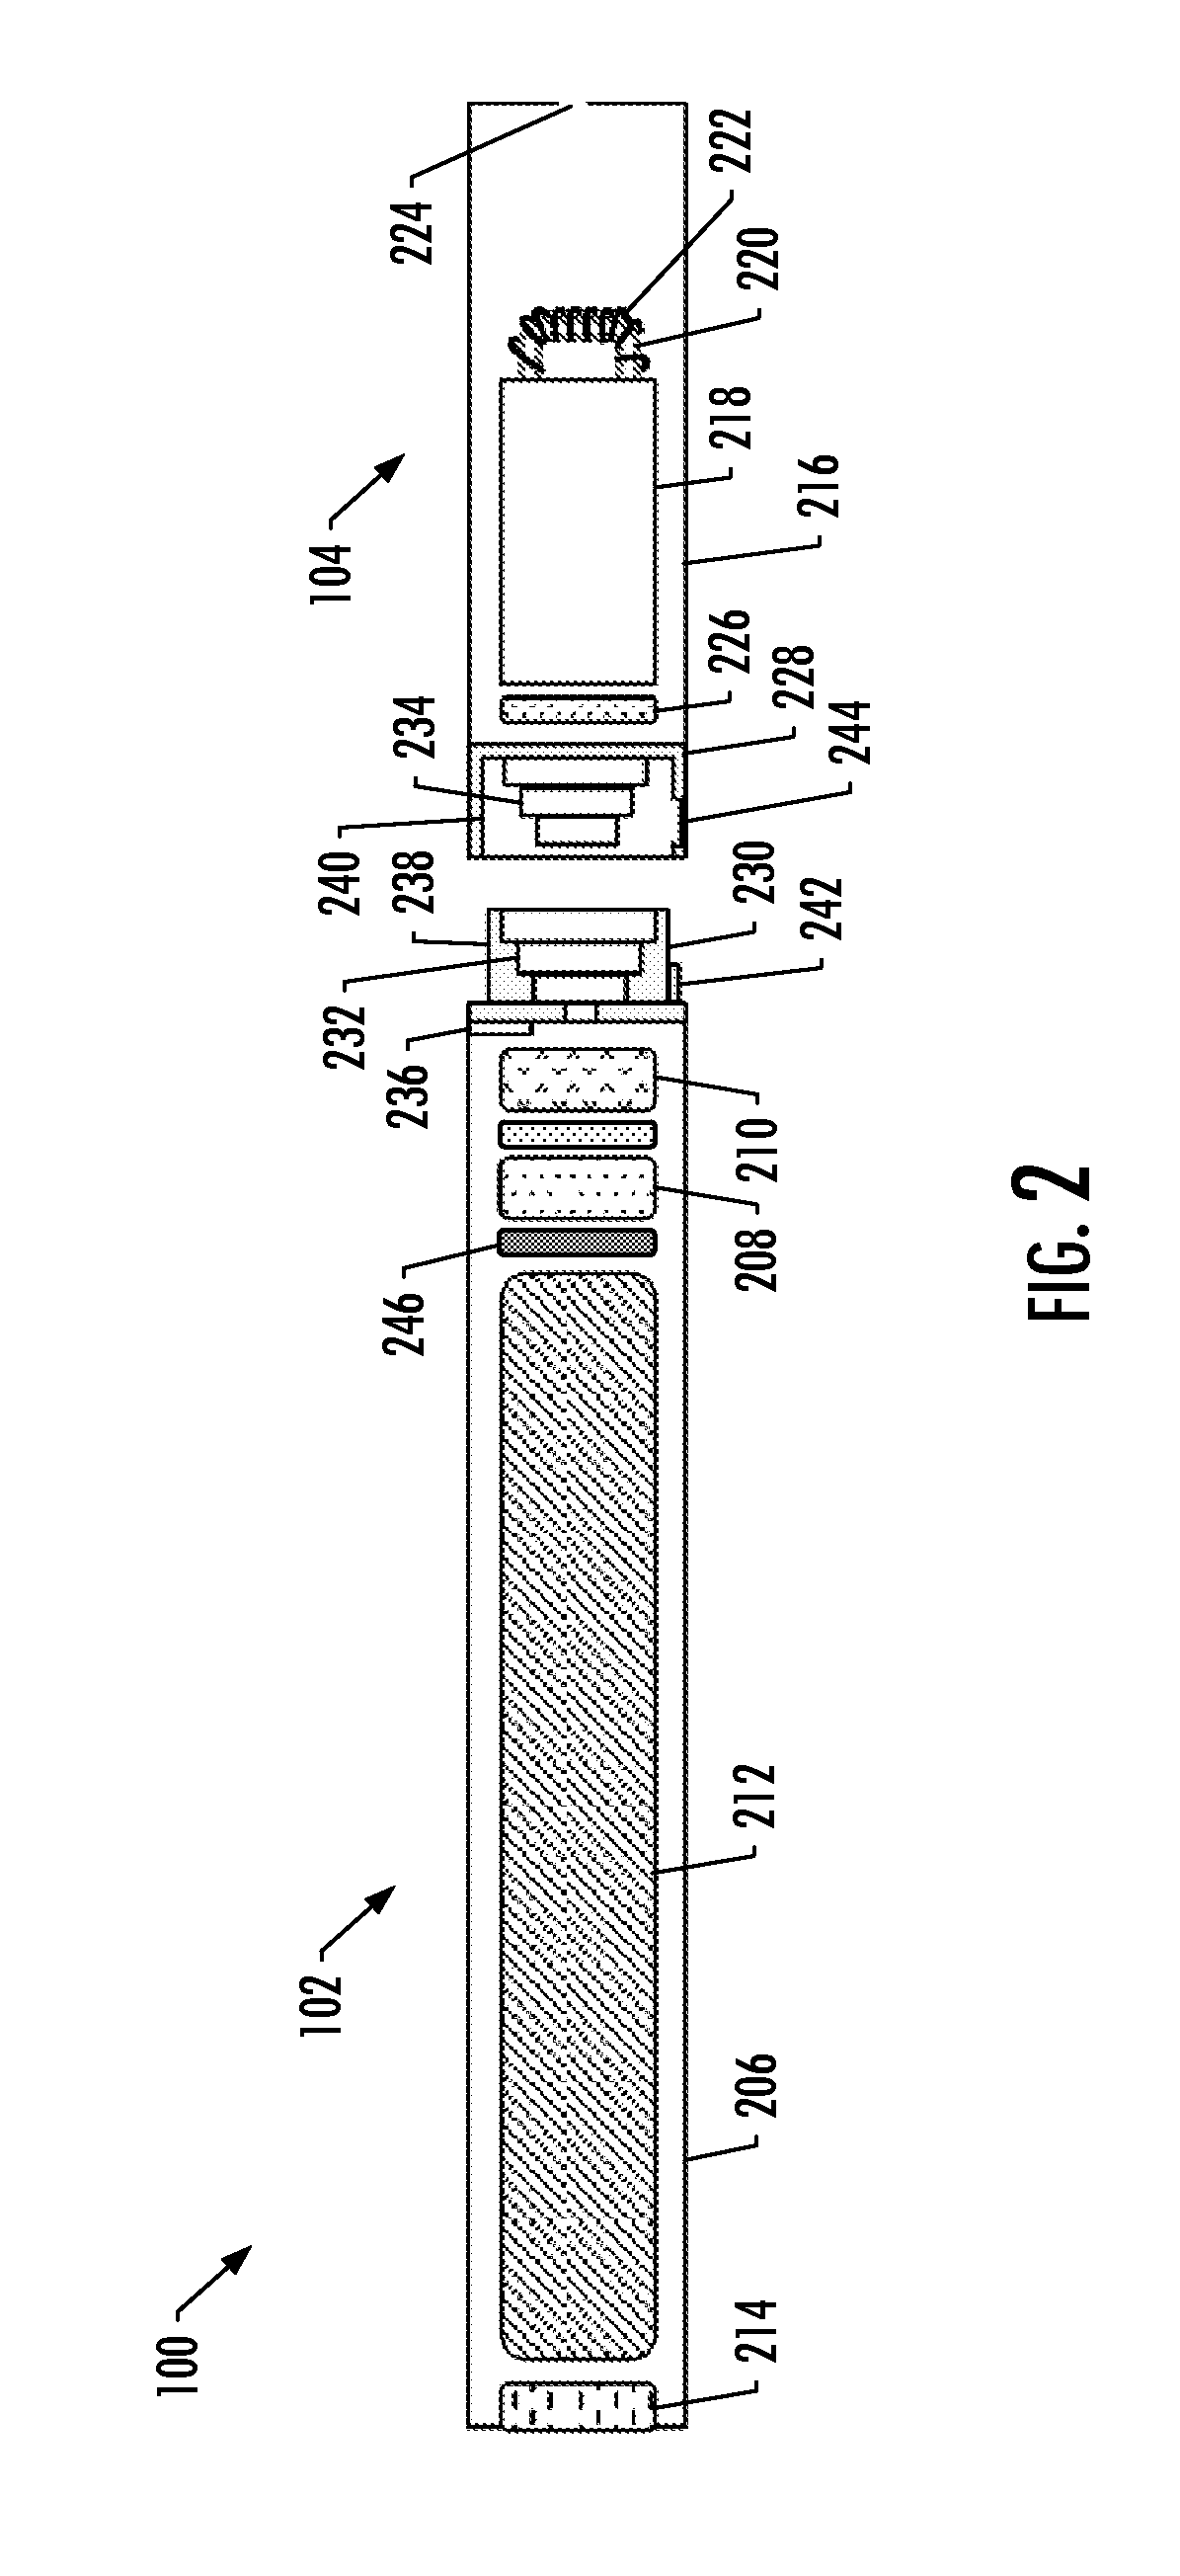 Trigger-based wireless broadcasting for aerosol delivery devices